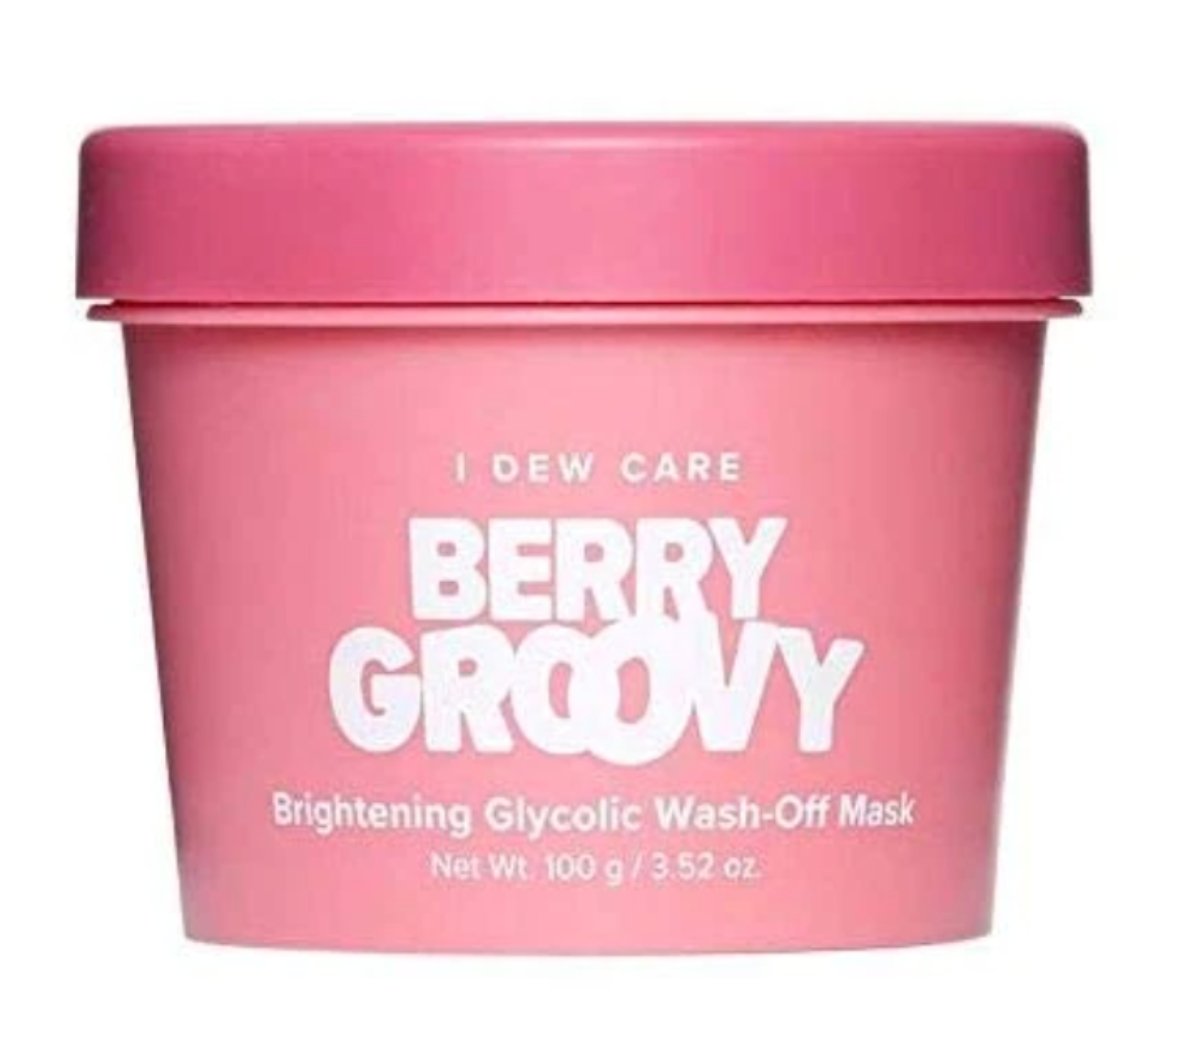 I DEW CARE - Berry Groovy Brightening Glycolic Wash-Off Mask EXP - The Face Method